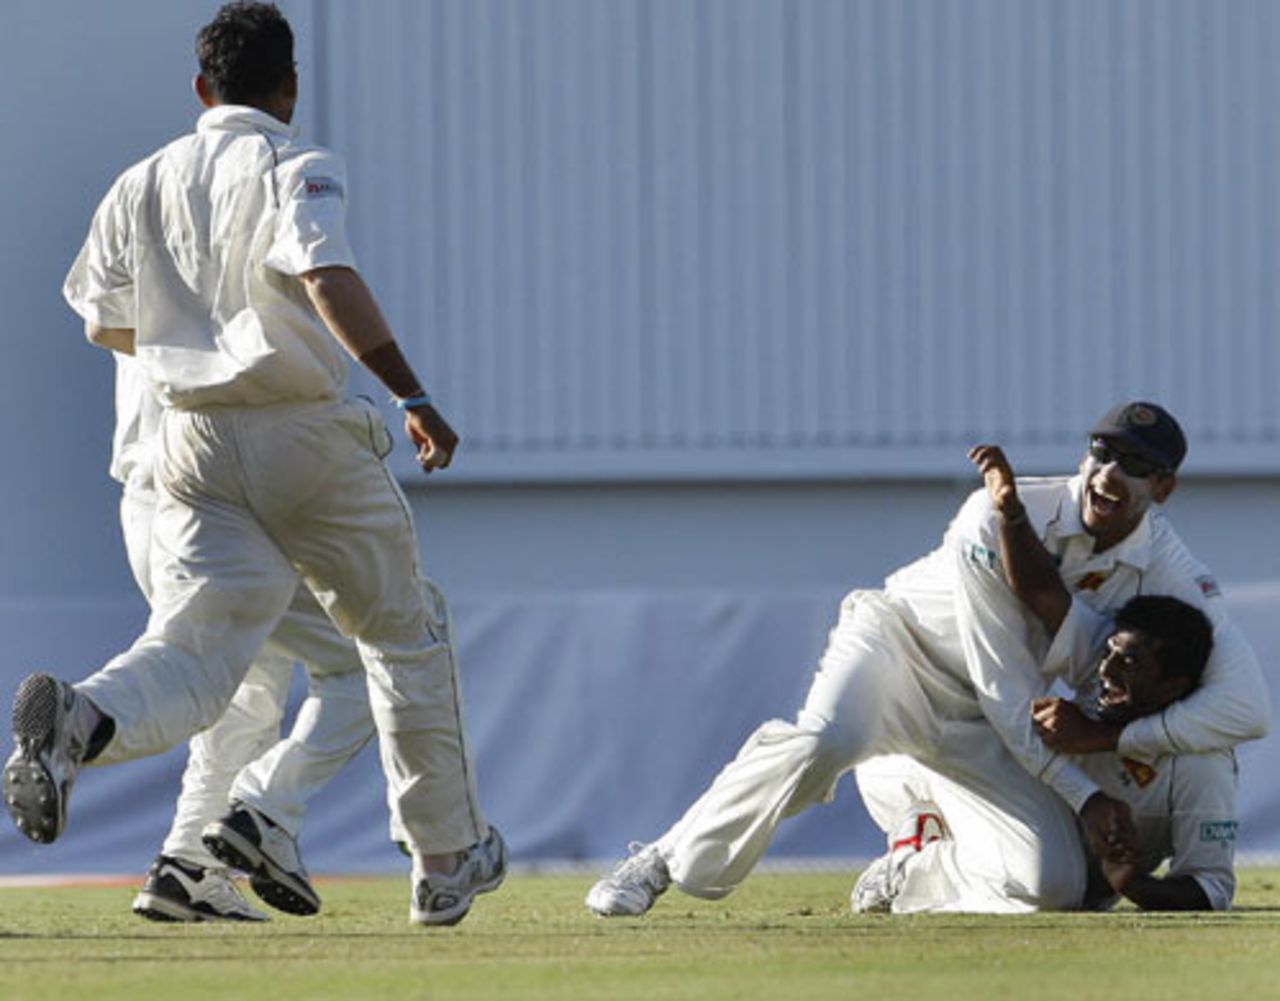 Muttiah Muralitharan is about to be mobbed after completing a stunning catch, West Indies v Sri Lanka, 1st Test, Guyana, 5th day, March 26, 2008